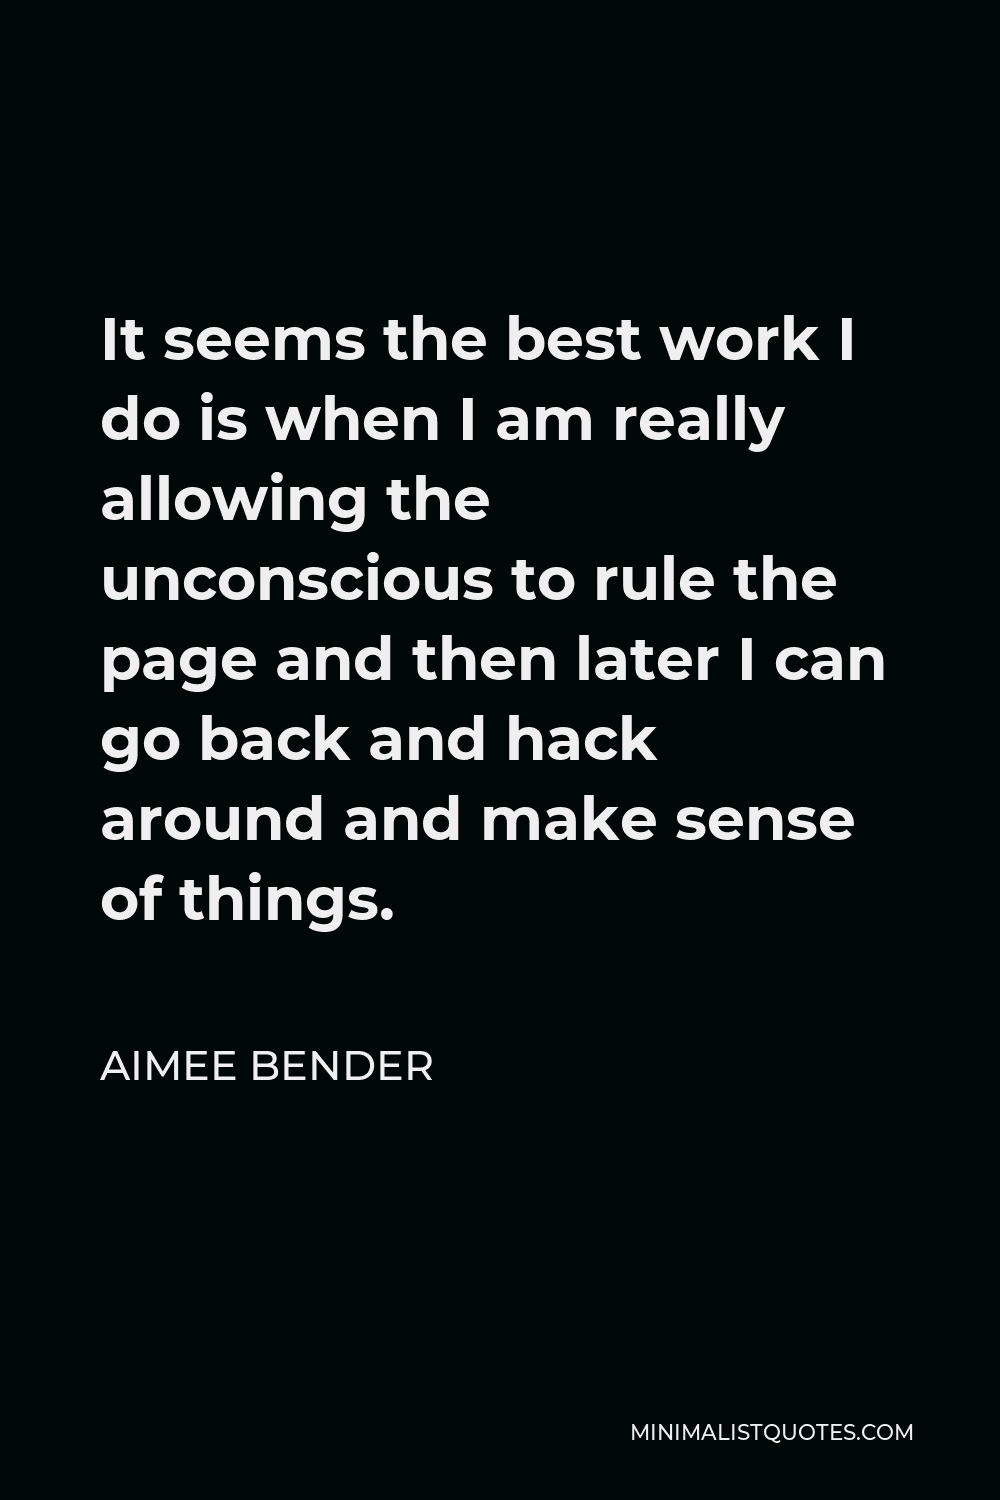 Aimee Bender Quote - It seems the best work I do is when I am really allowing the unconscious to rule the page and then later I can go back and hack around and make sense of things.